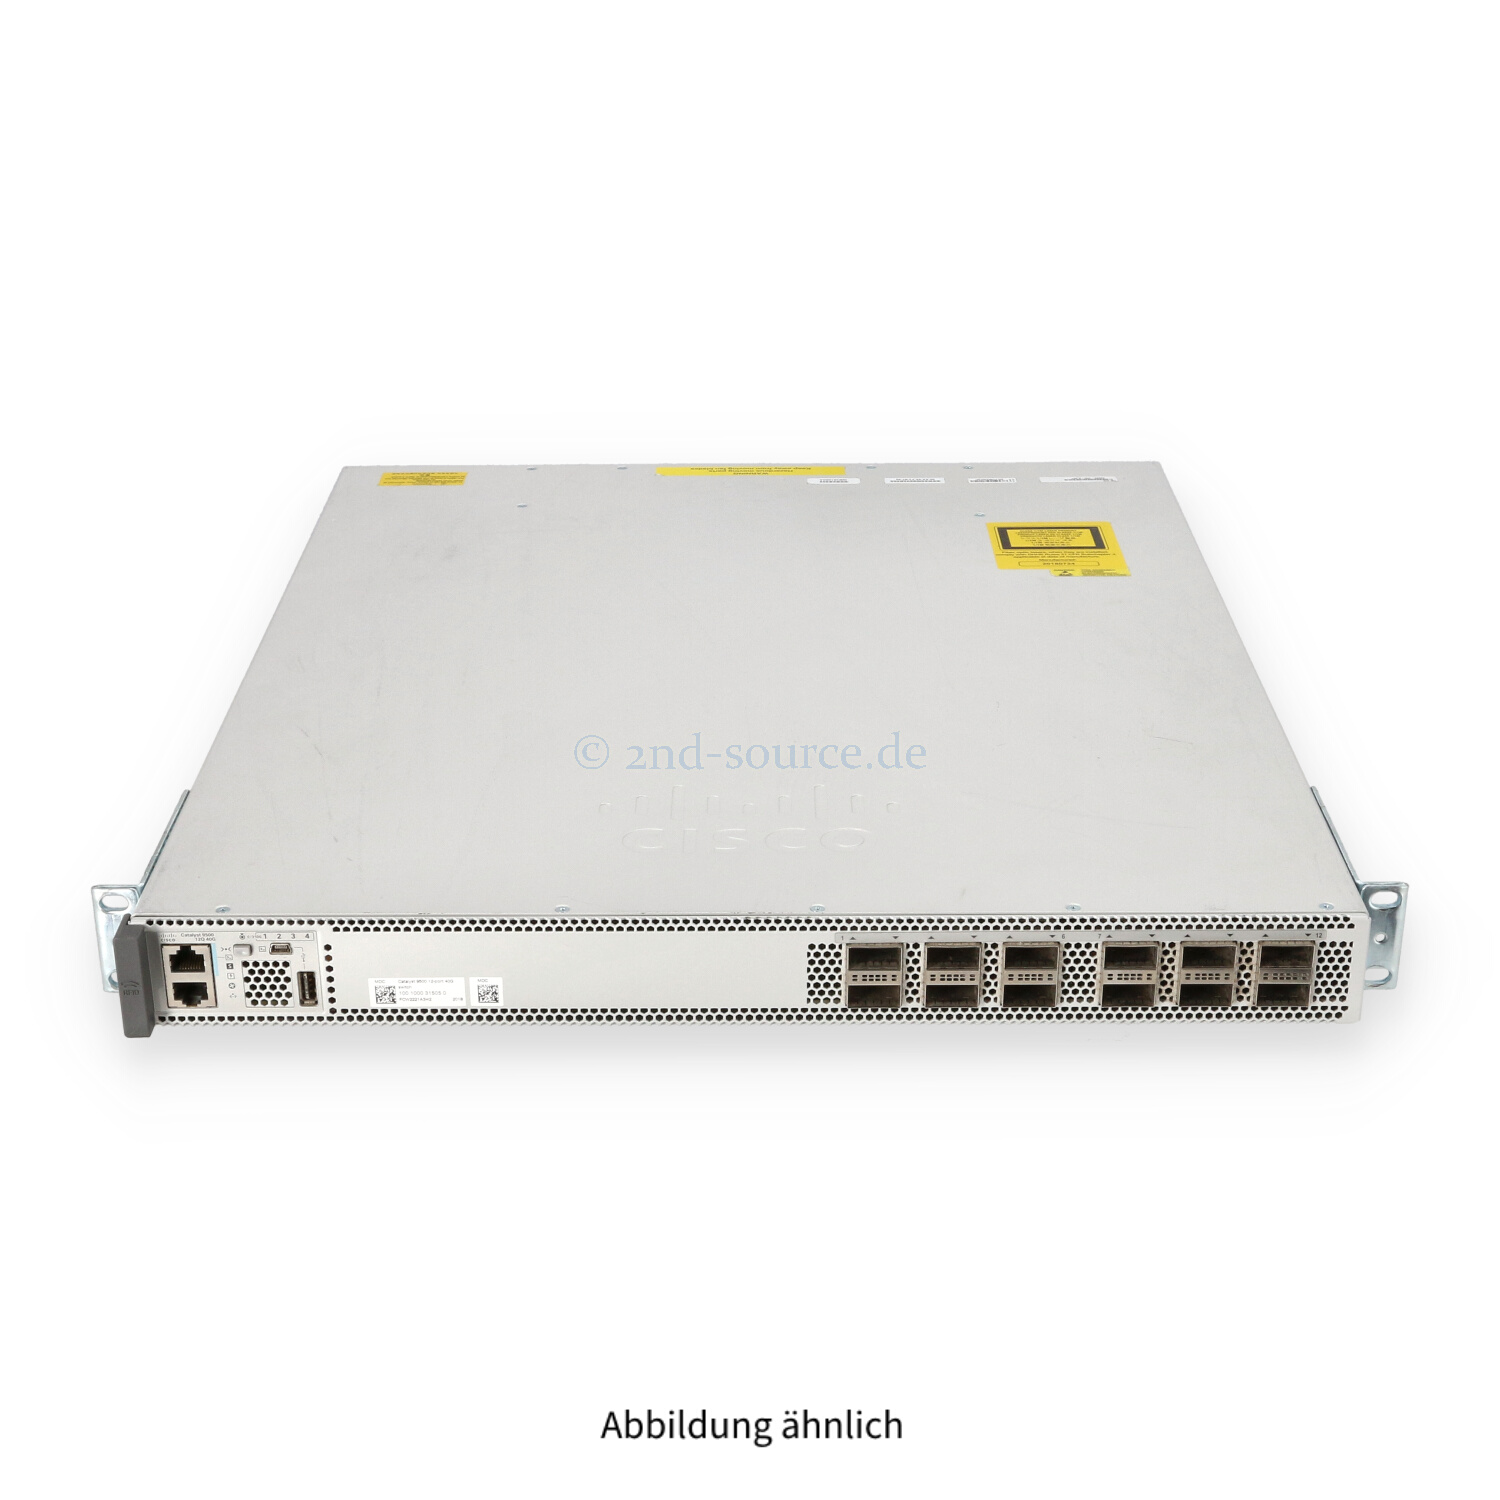 Cisco Catalyst 9500 12x QSFP+ 40GbE Managed Switch Chassis C9500-12Q-A